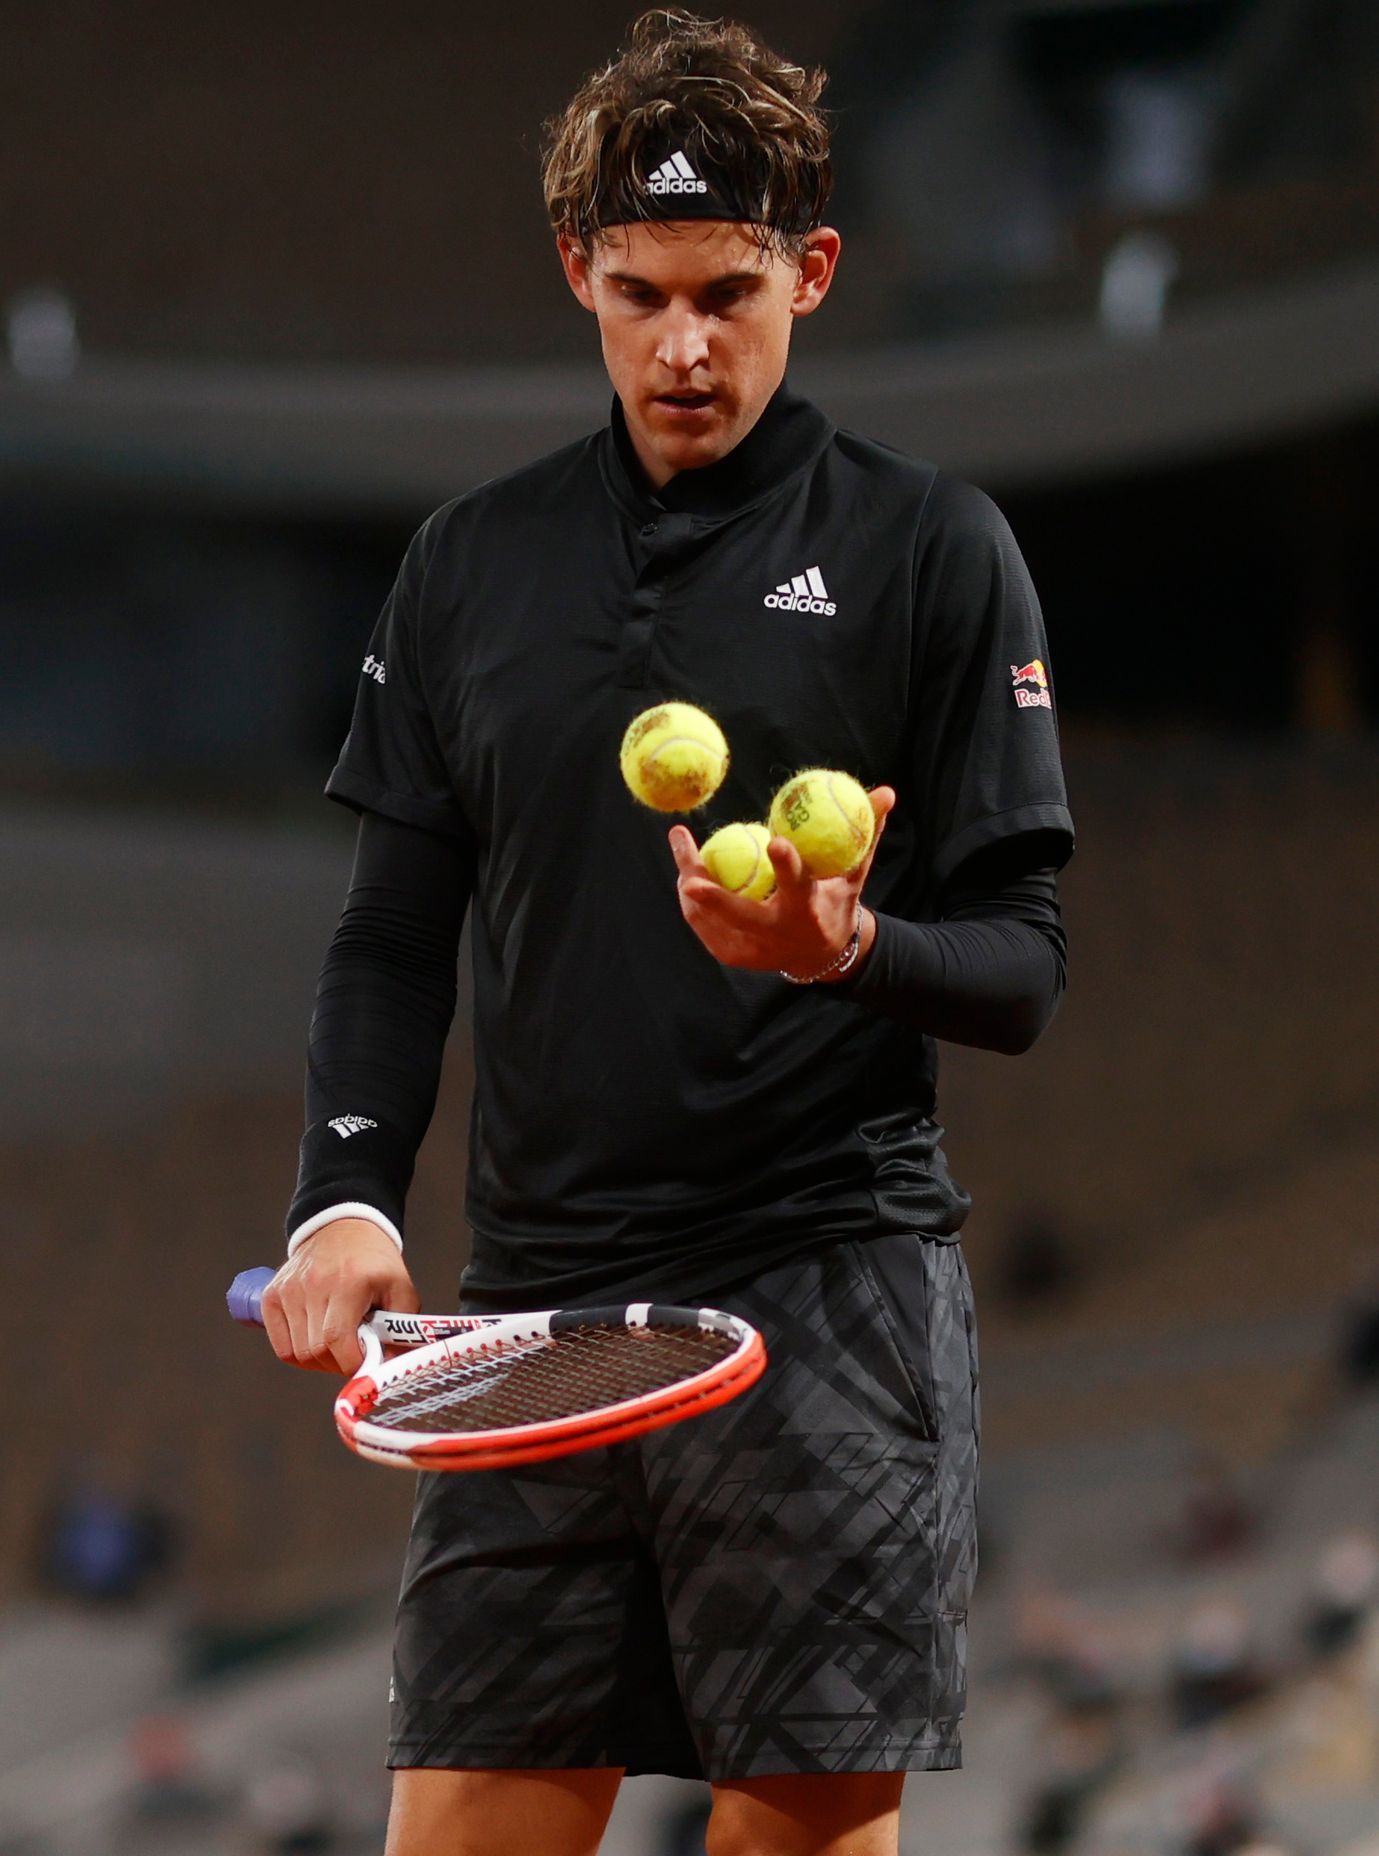 Dominic Thiem, French Open 2020